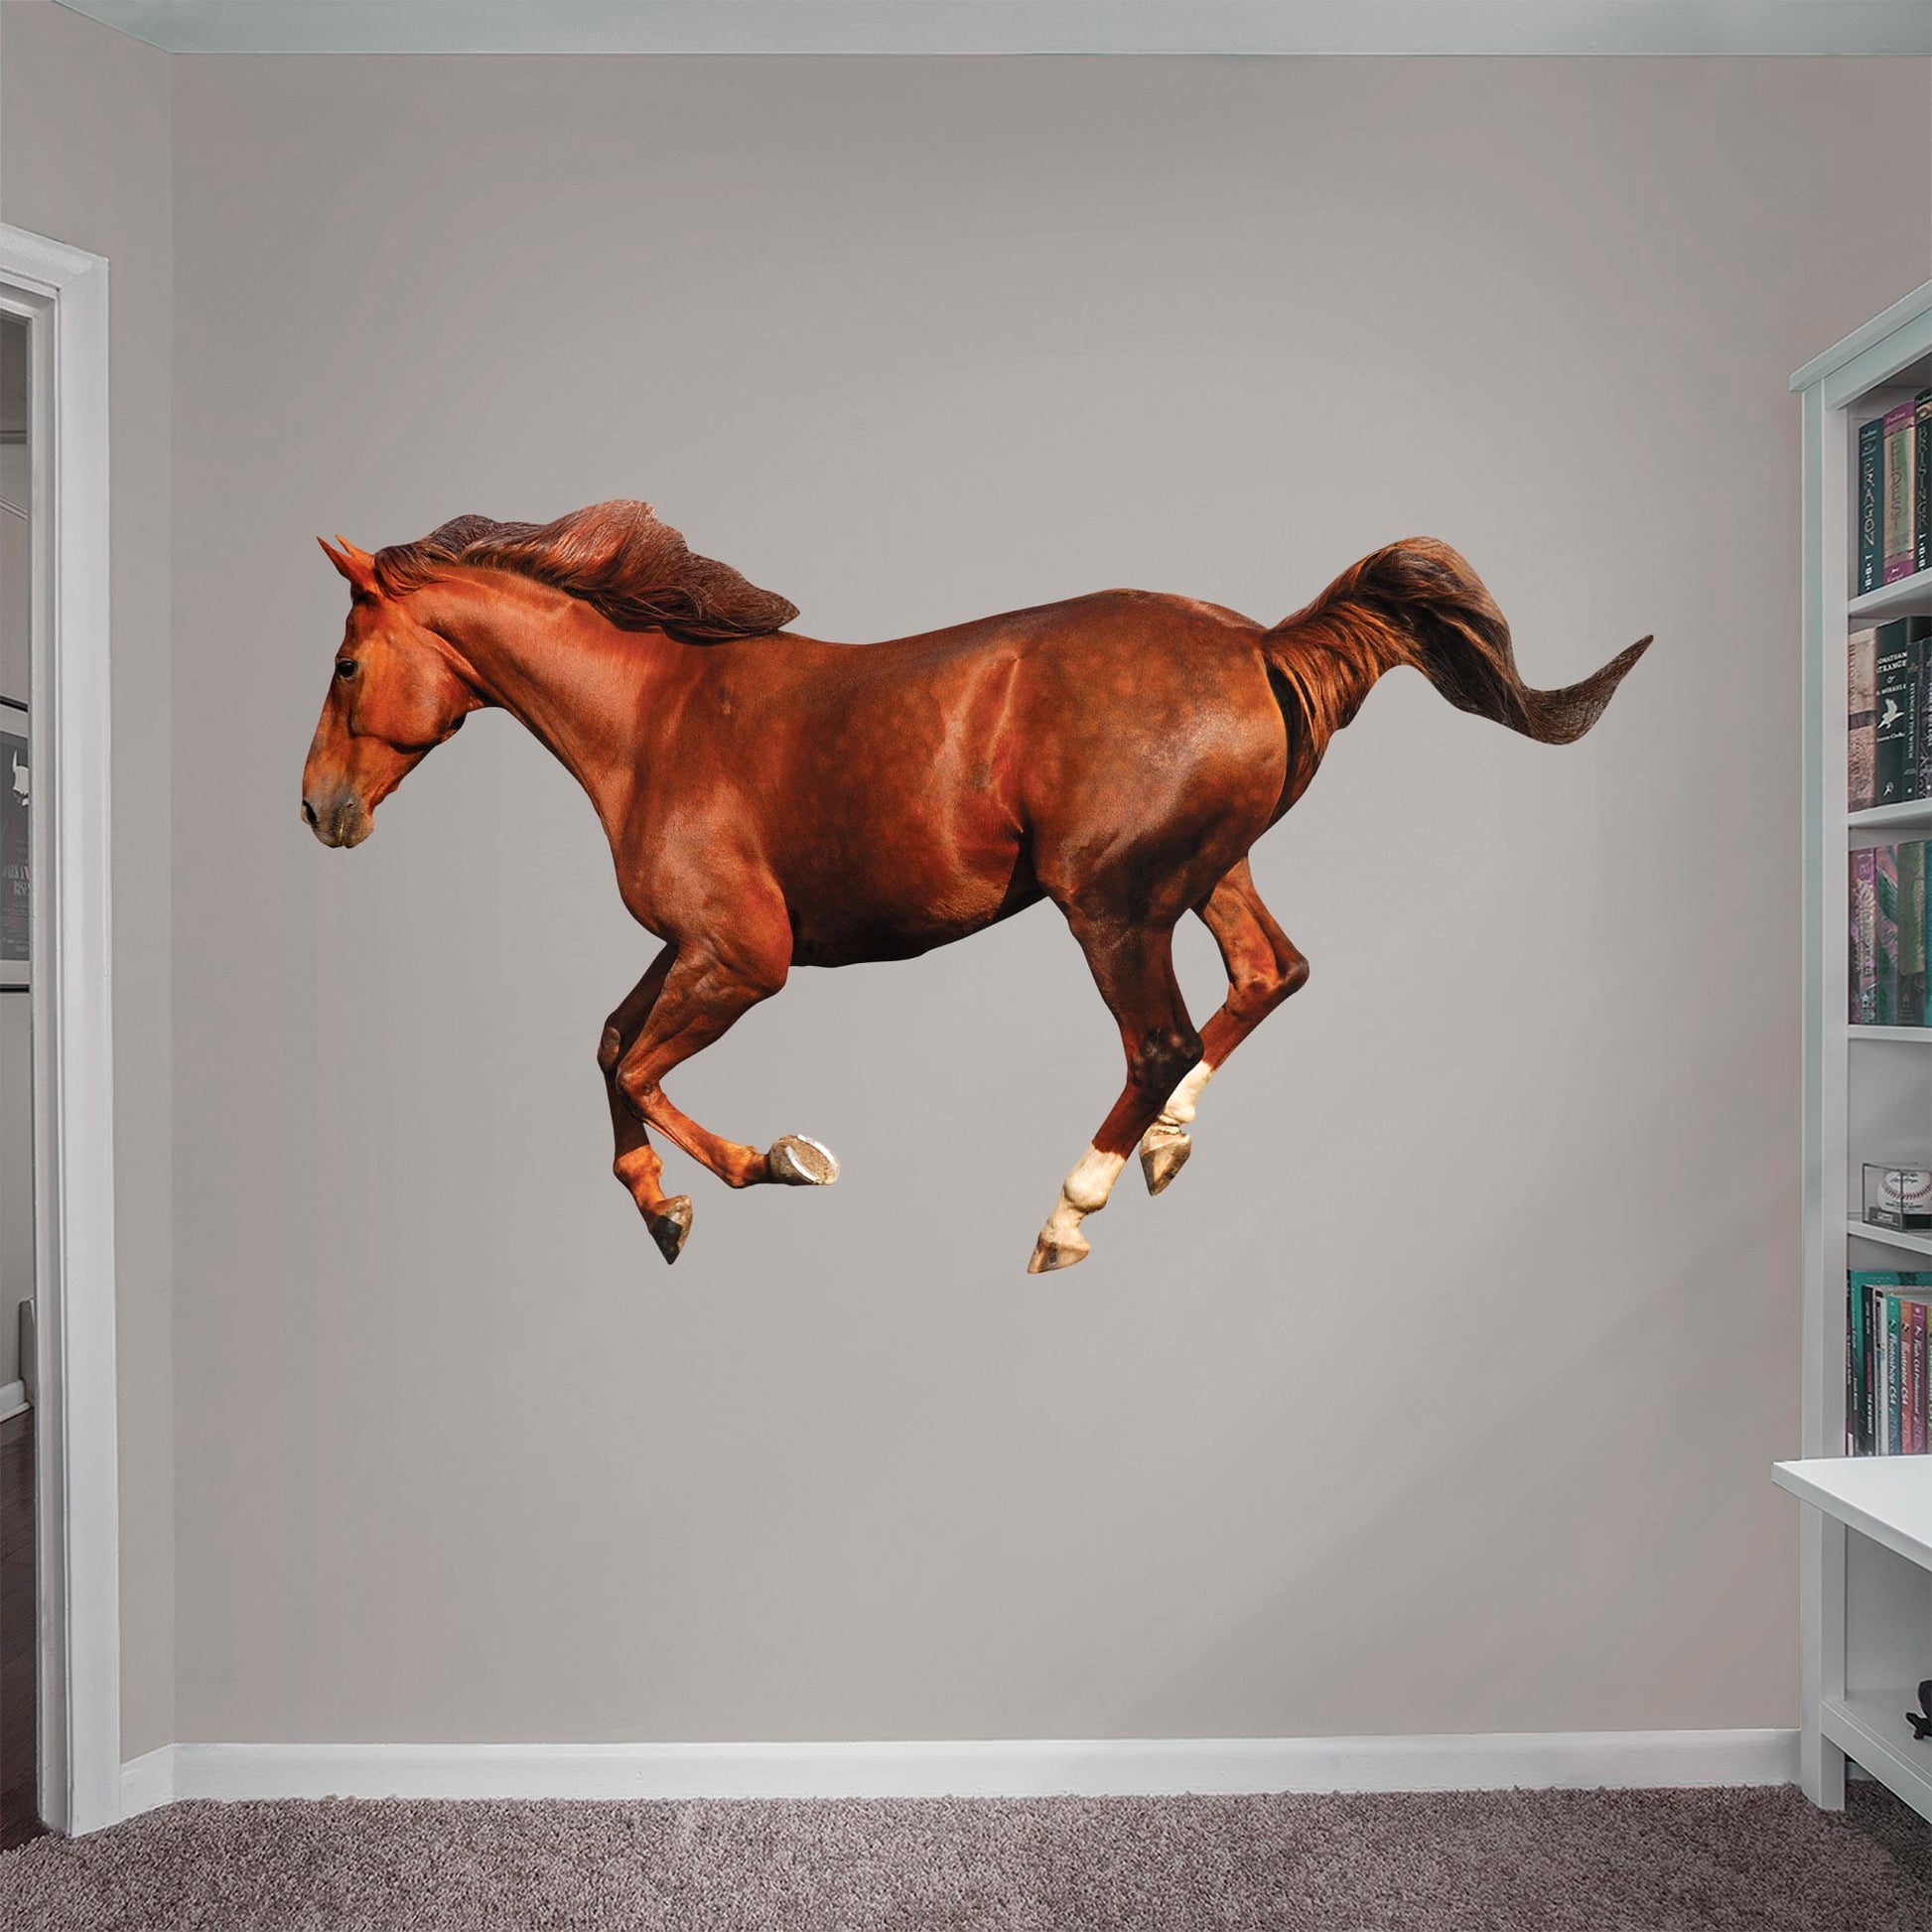 Giant Animal + 2 Decals (51"W x 35"H)